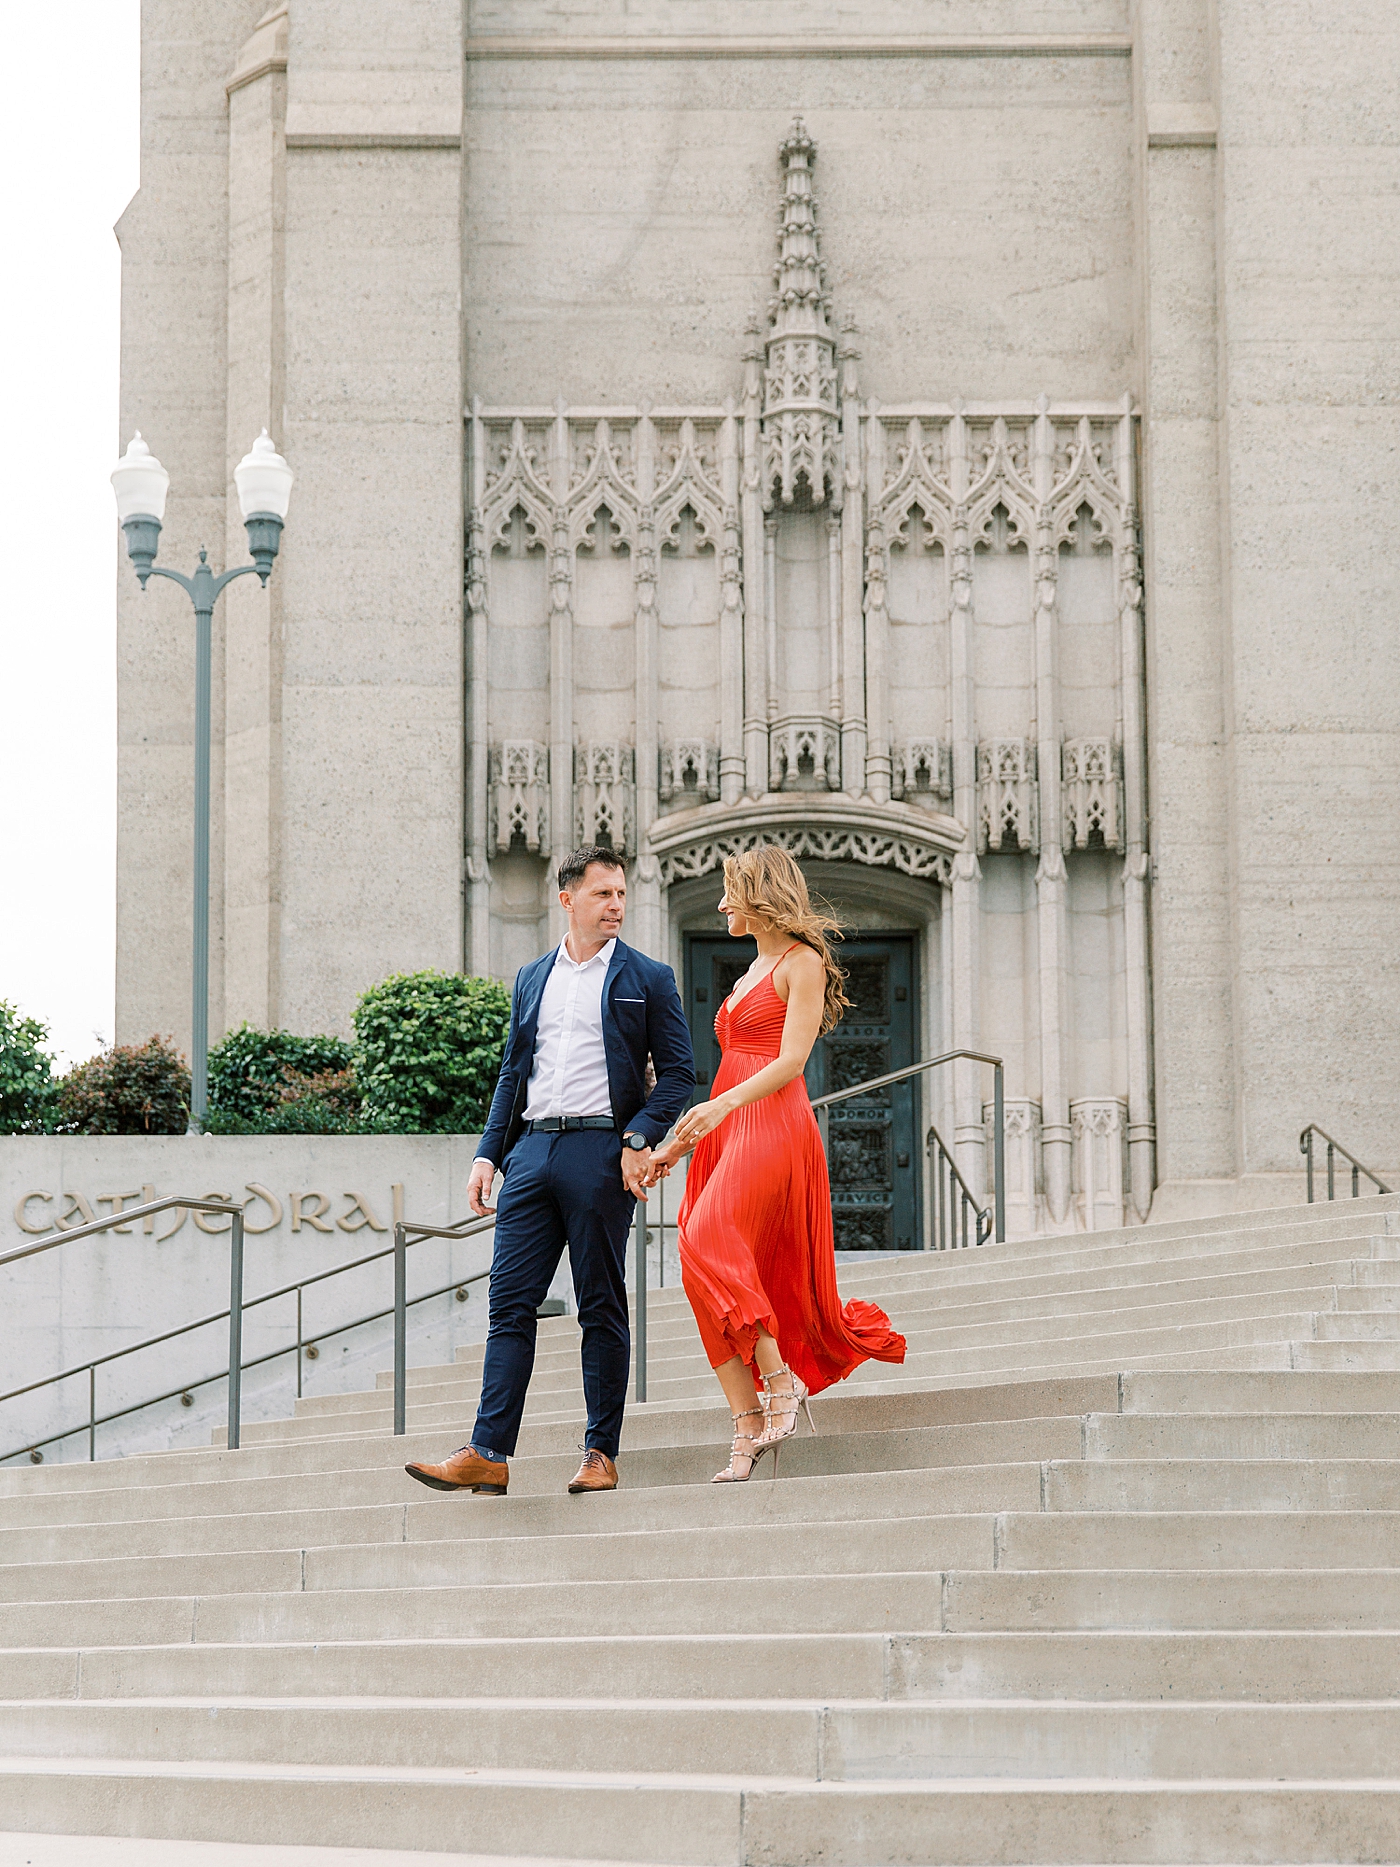 Couple in red and blue walking down the steps at a church | Photo by Diane Sotero